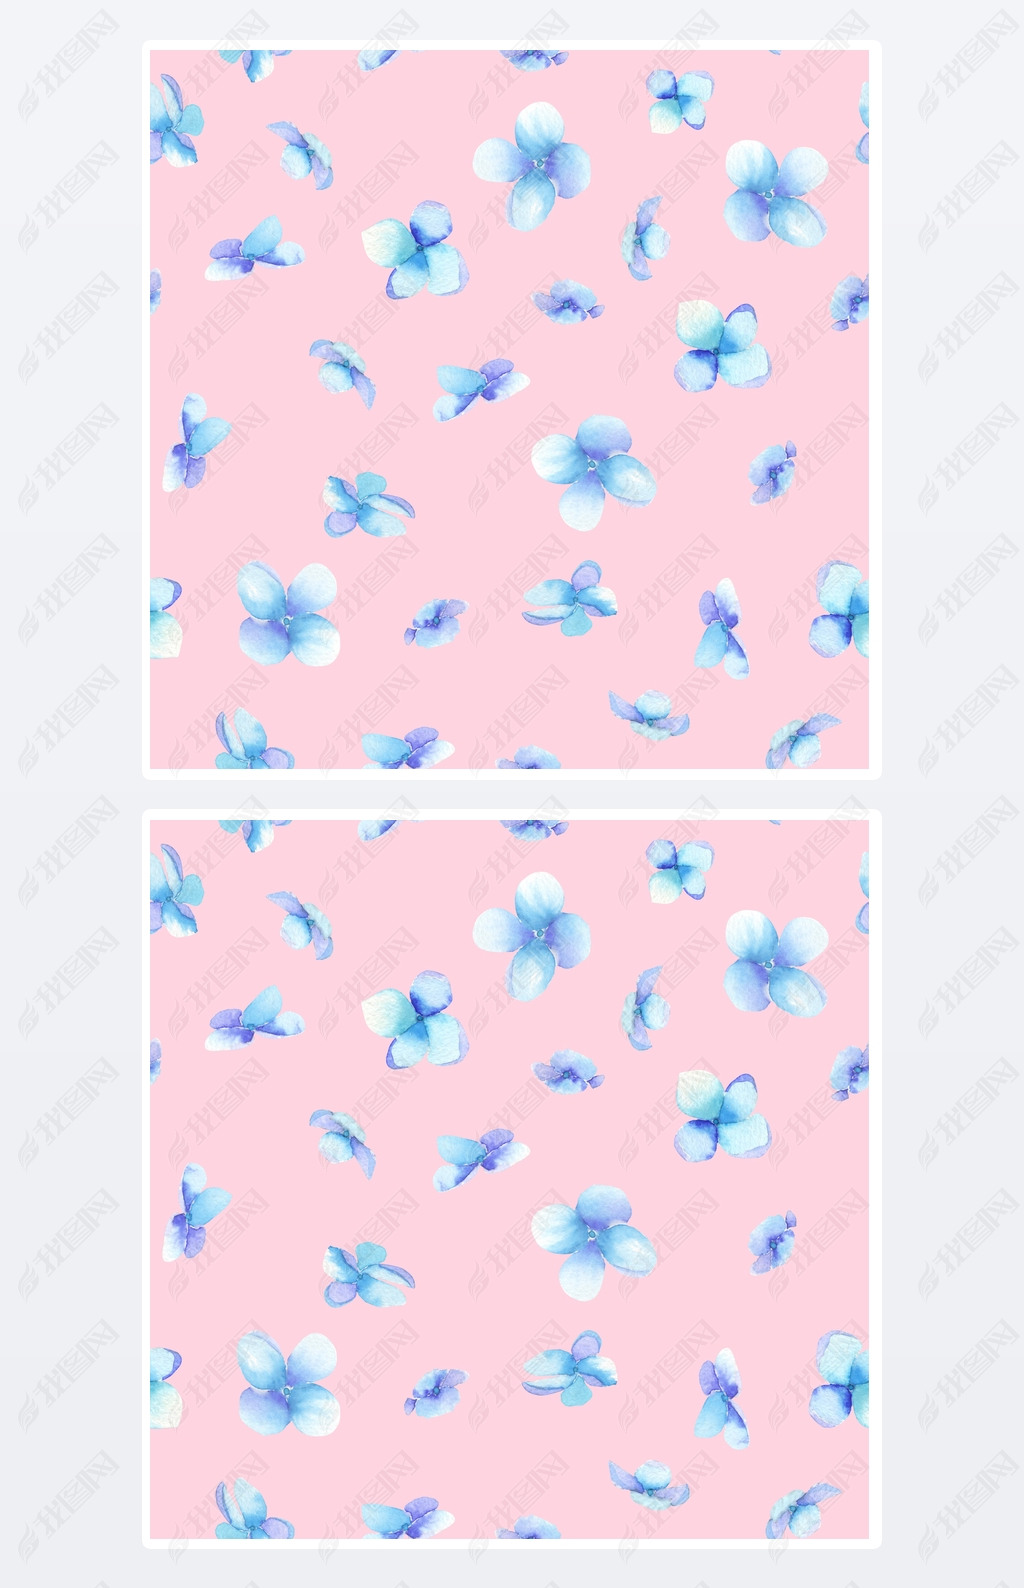 A seamless pattern with the blue flowers (Myosotis), painted in a watercolor on a pink background